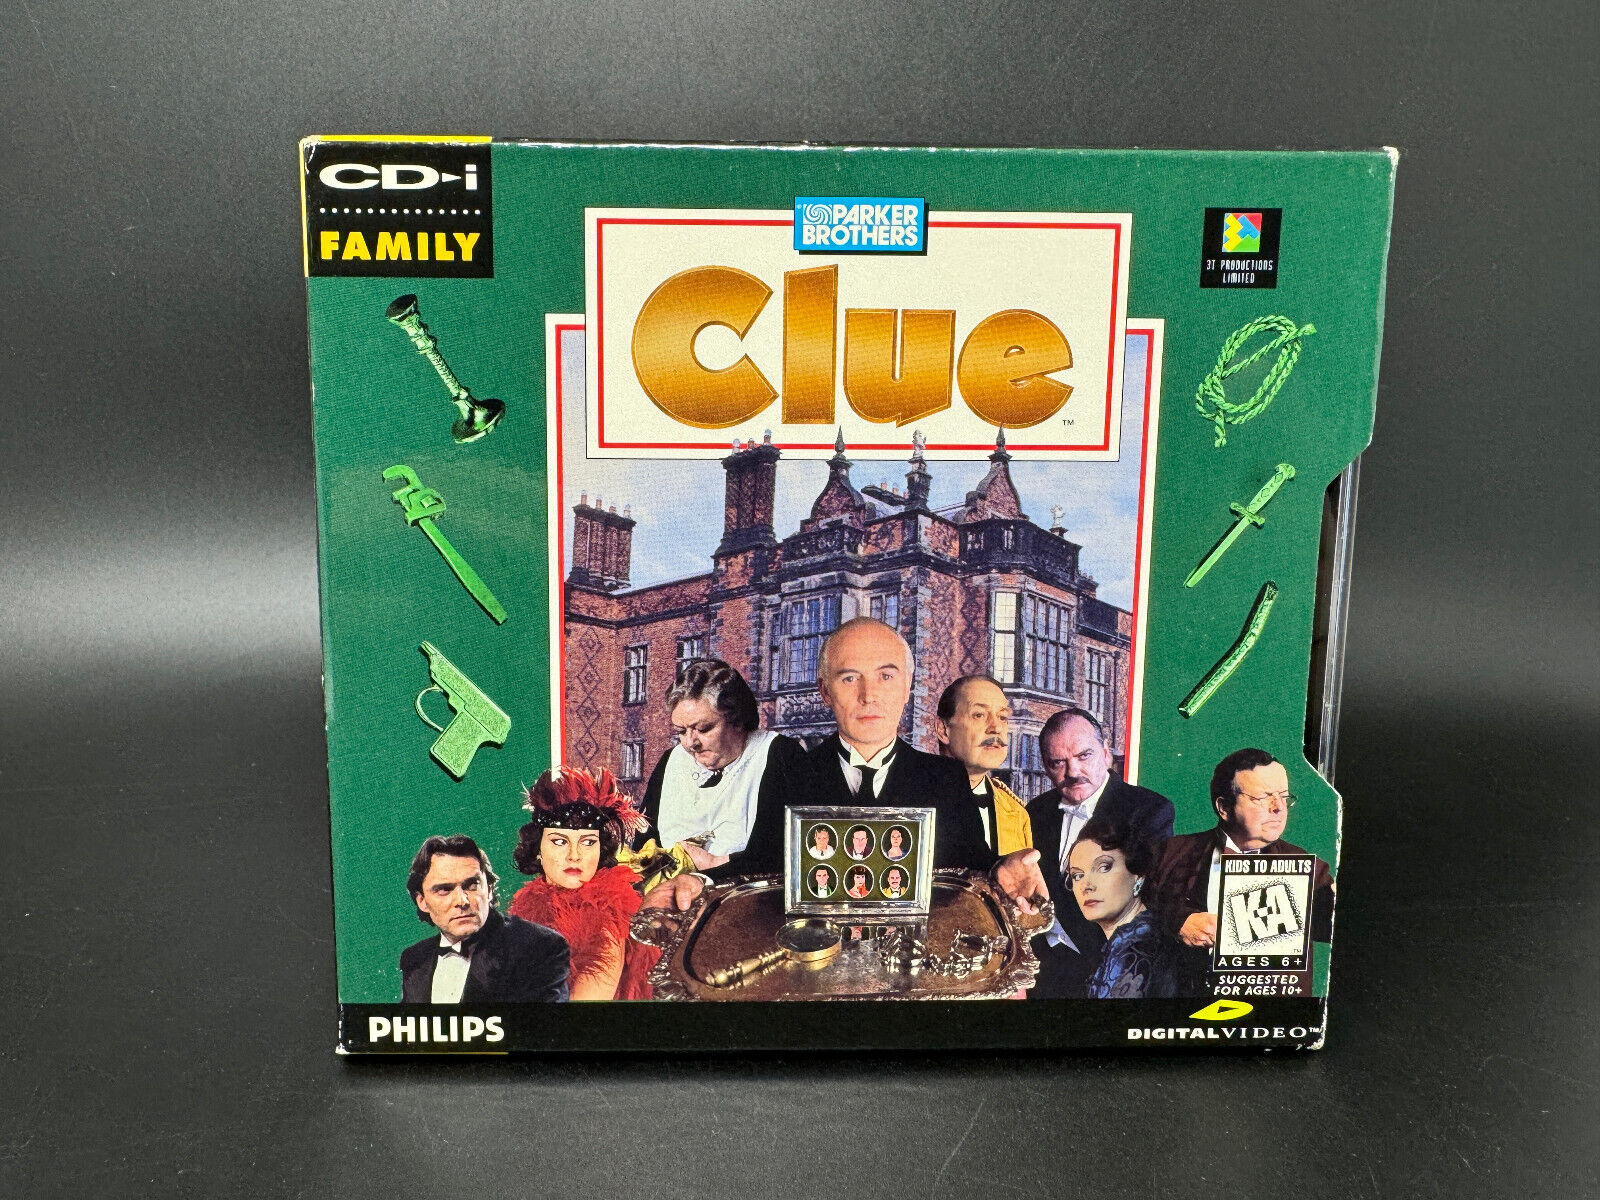 Clue (Philips CD-i) *COMPLETE W/ SLIPCOVER - TESTED*